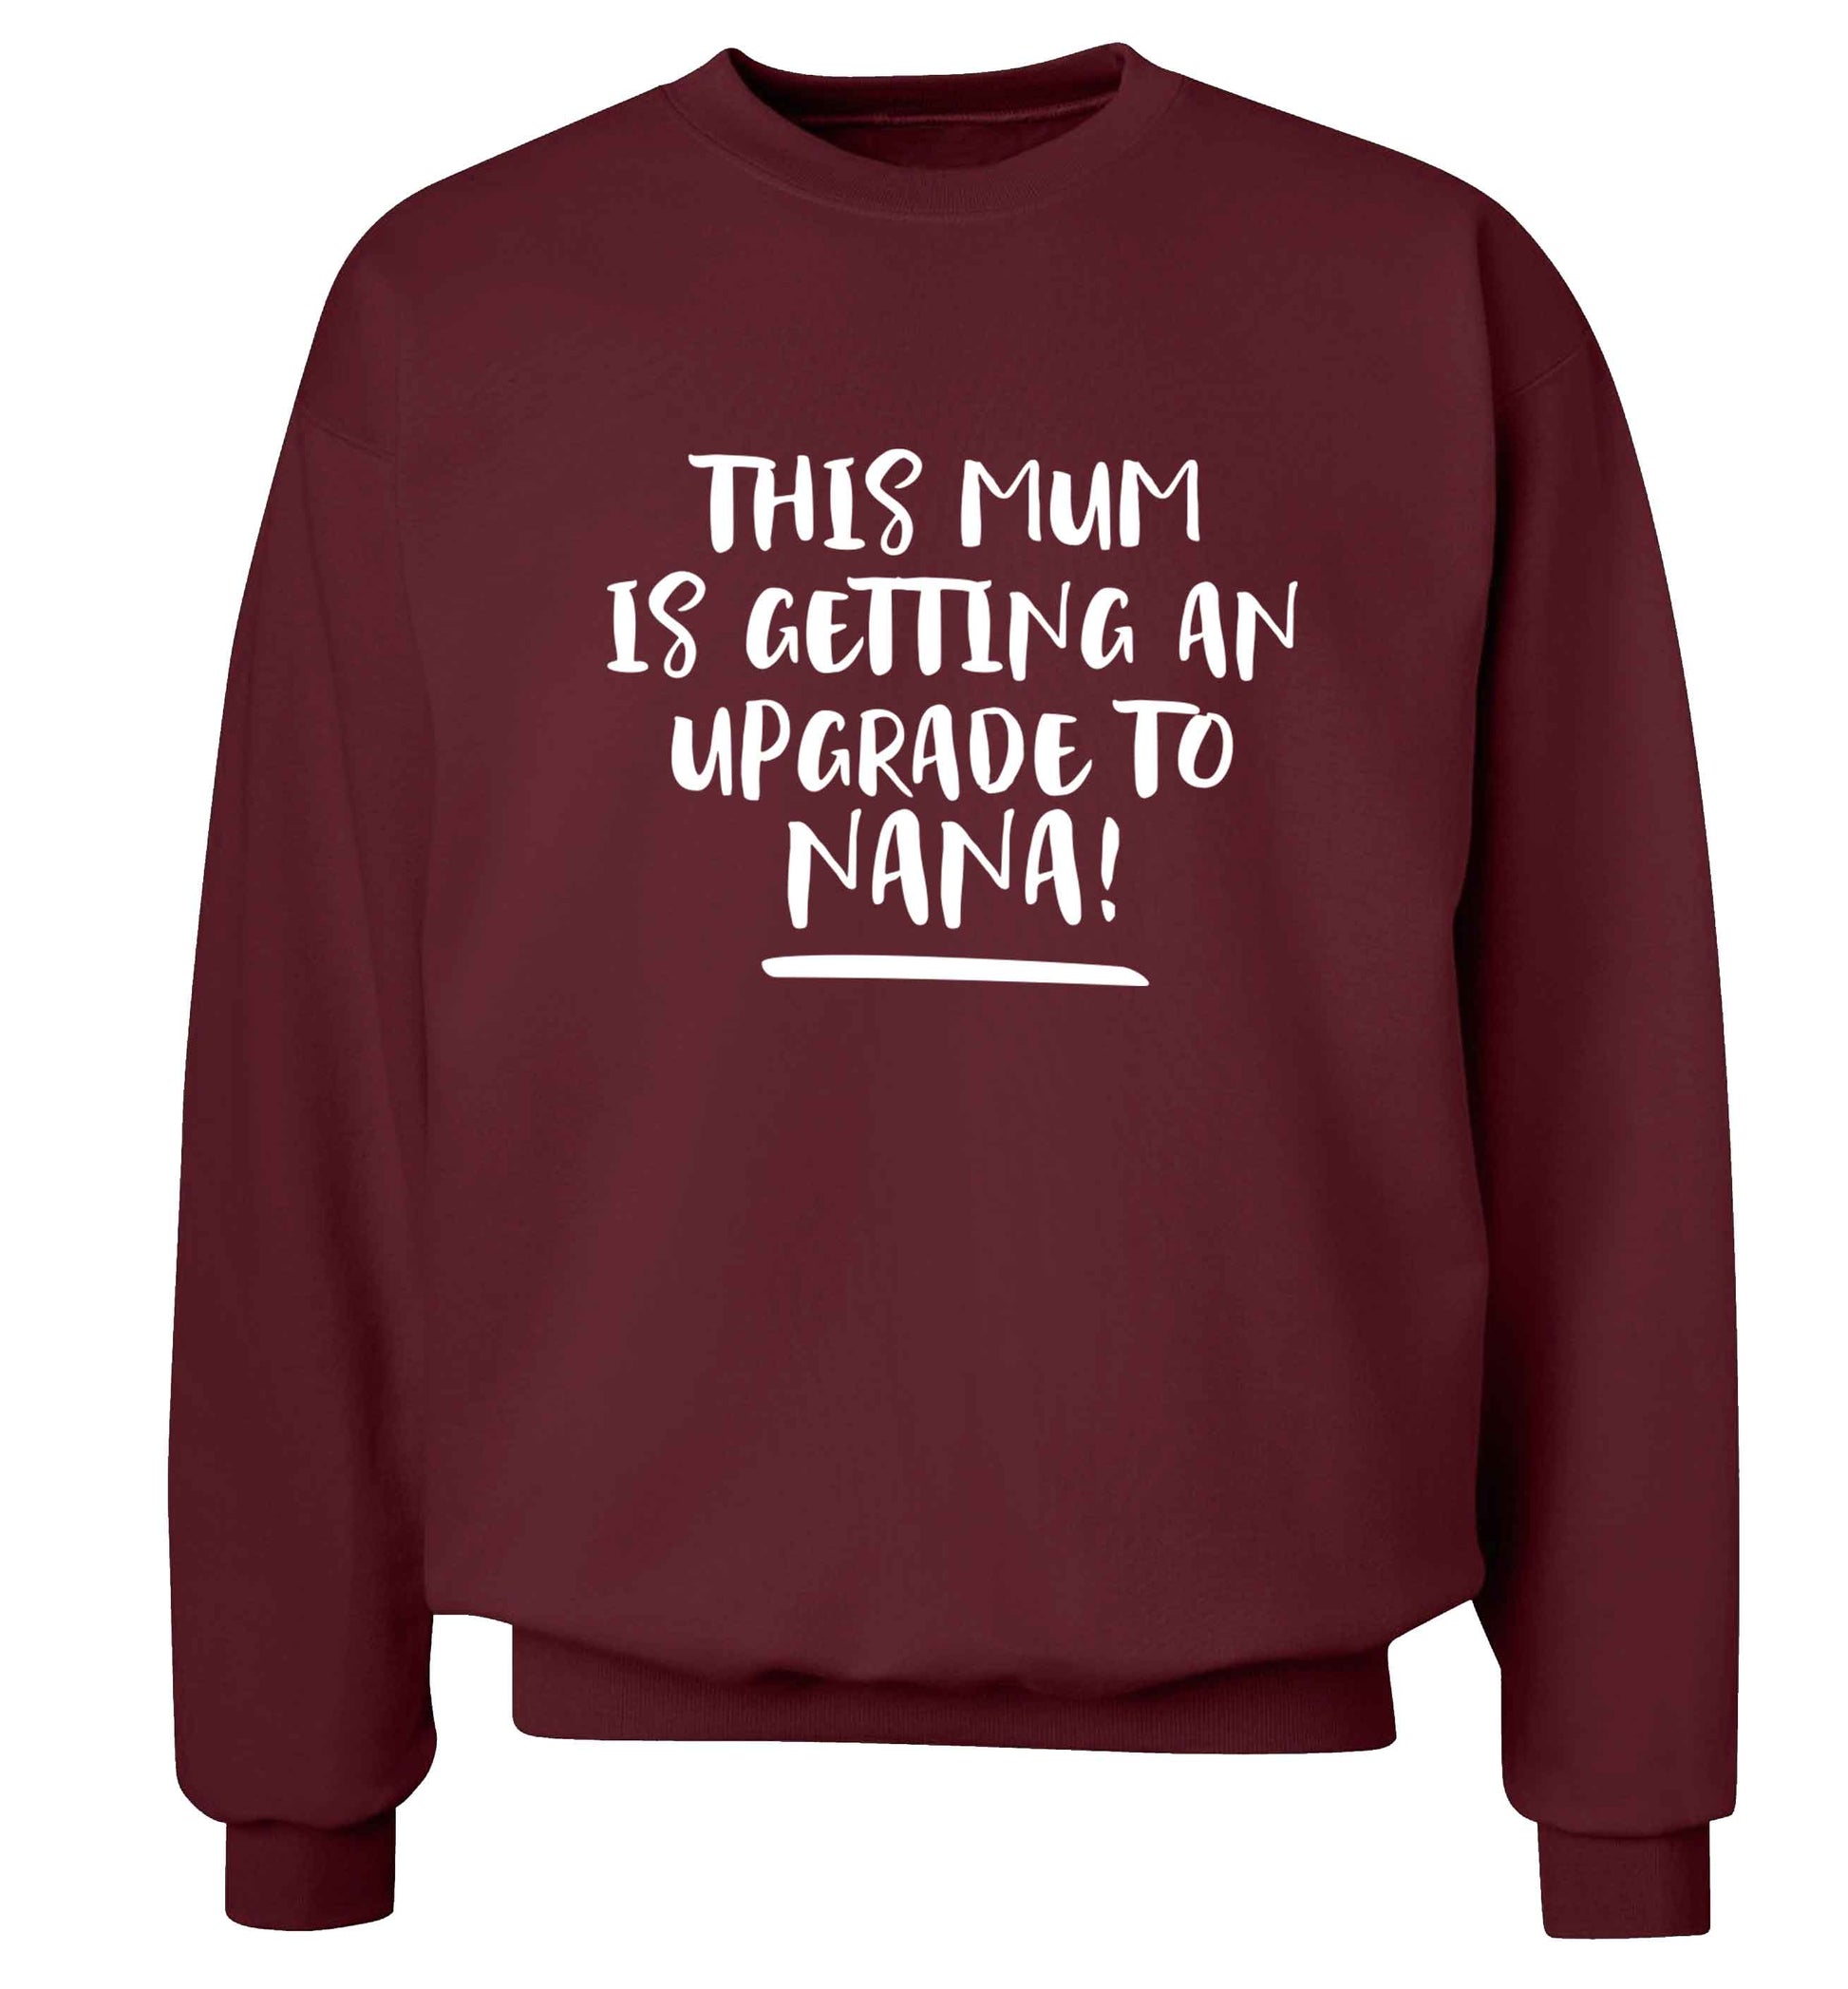 This mum is getting an upgrade to nana! Adult's unisex maroon Sweater 2XL